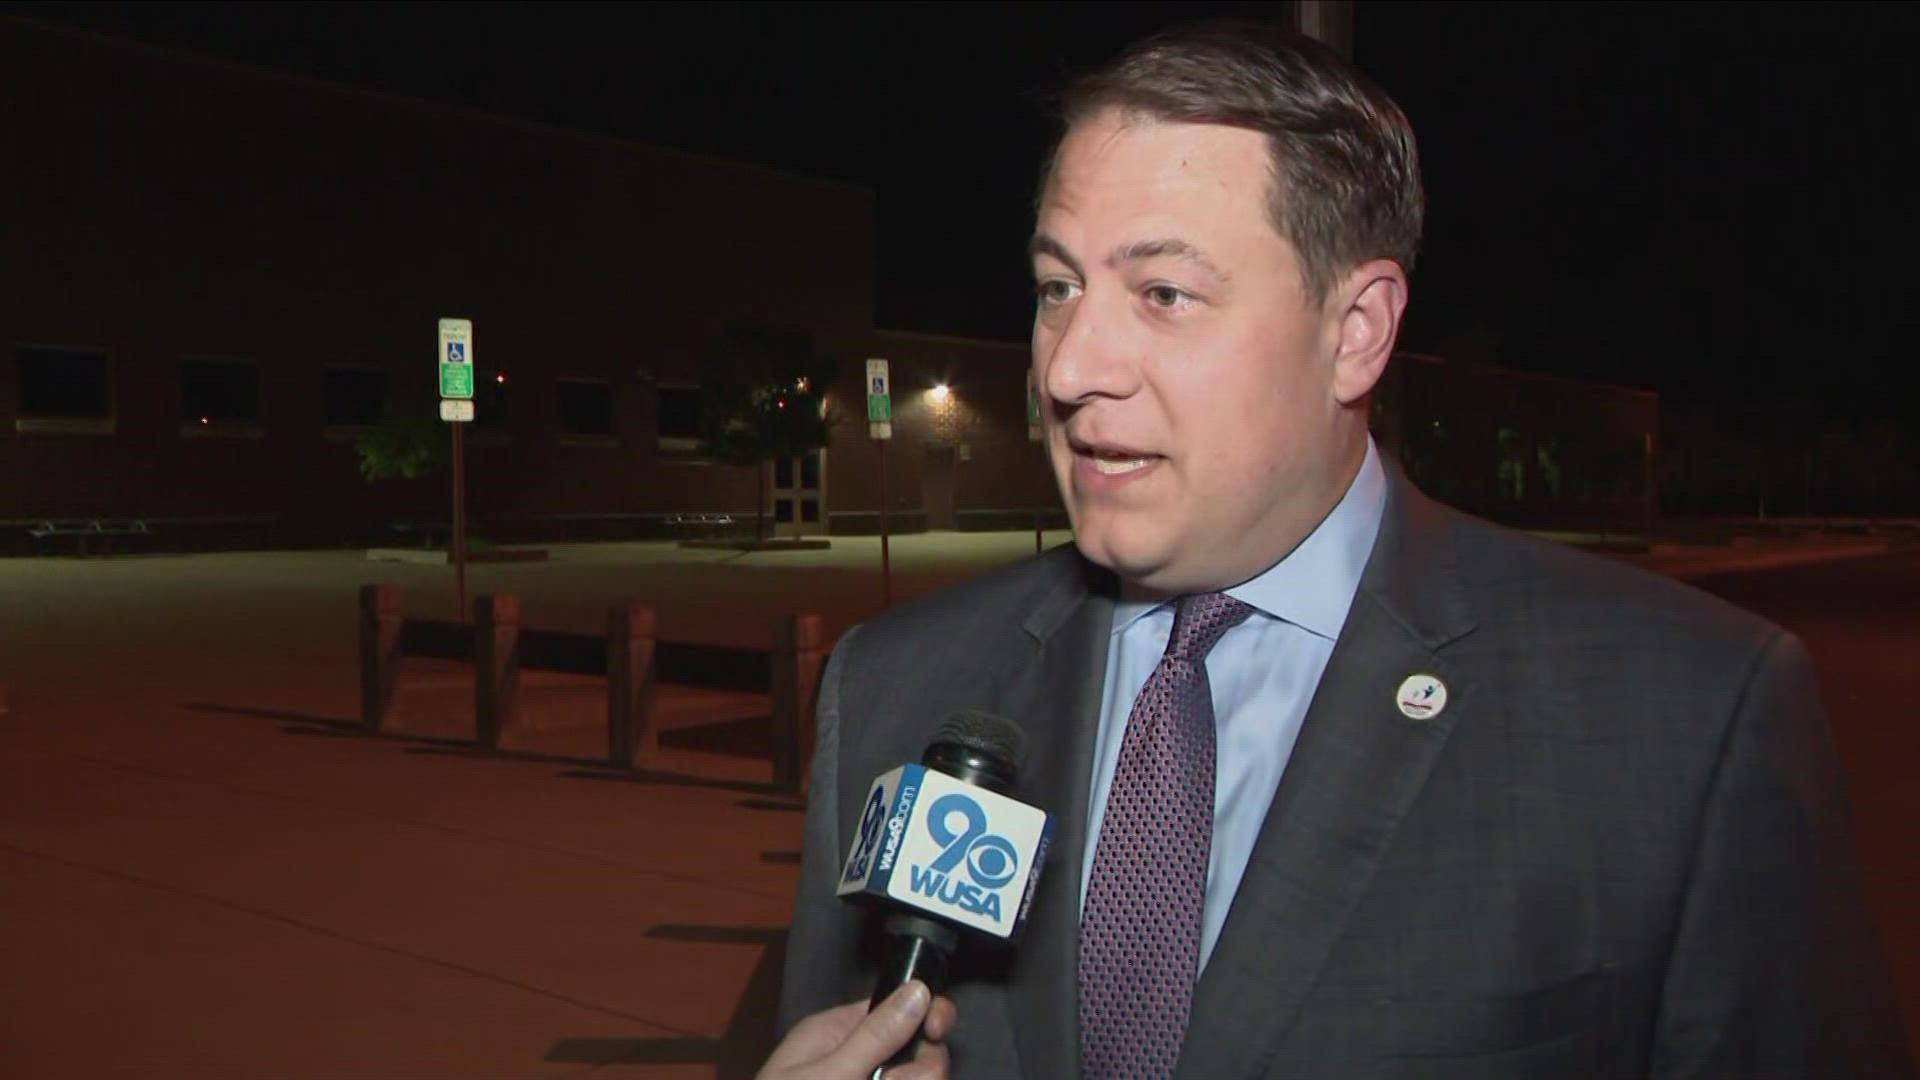 We spoke to the superintendent about the expectations for students as classes begin.